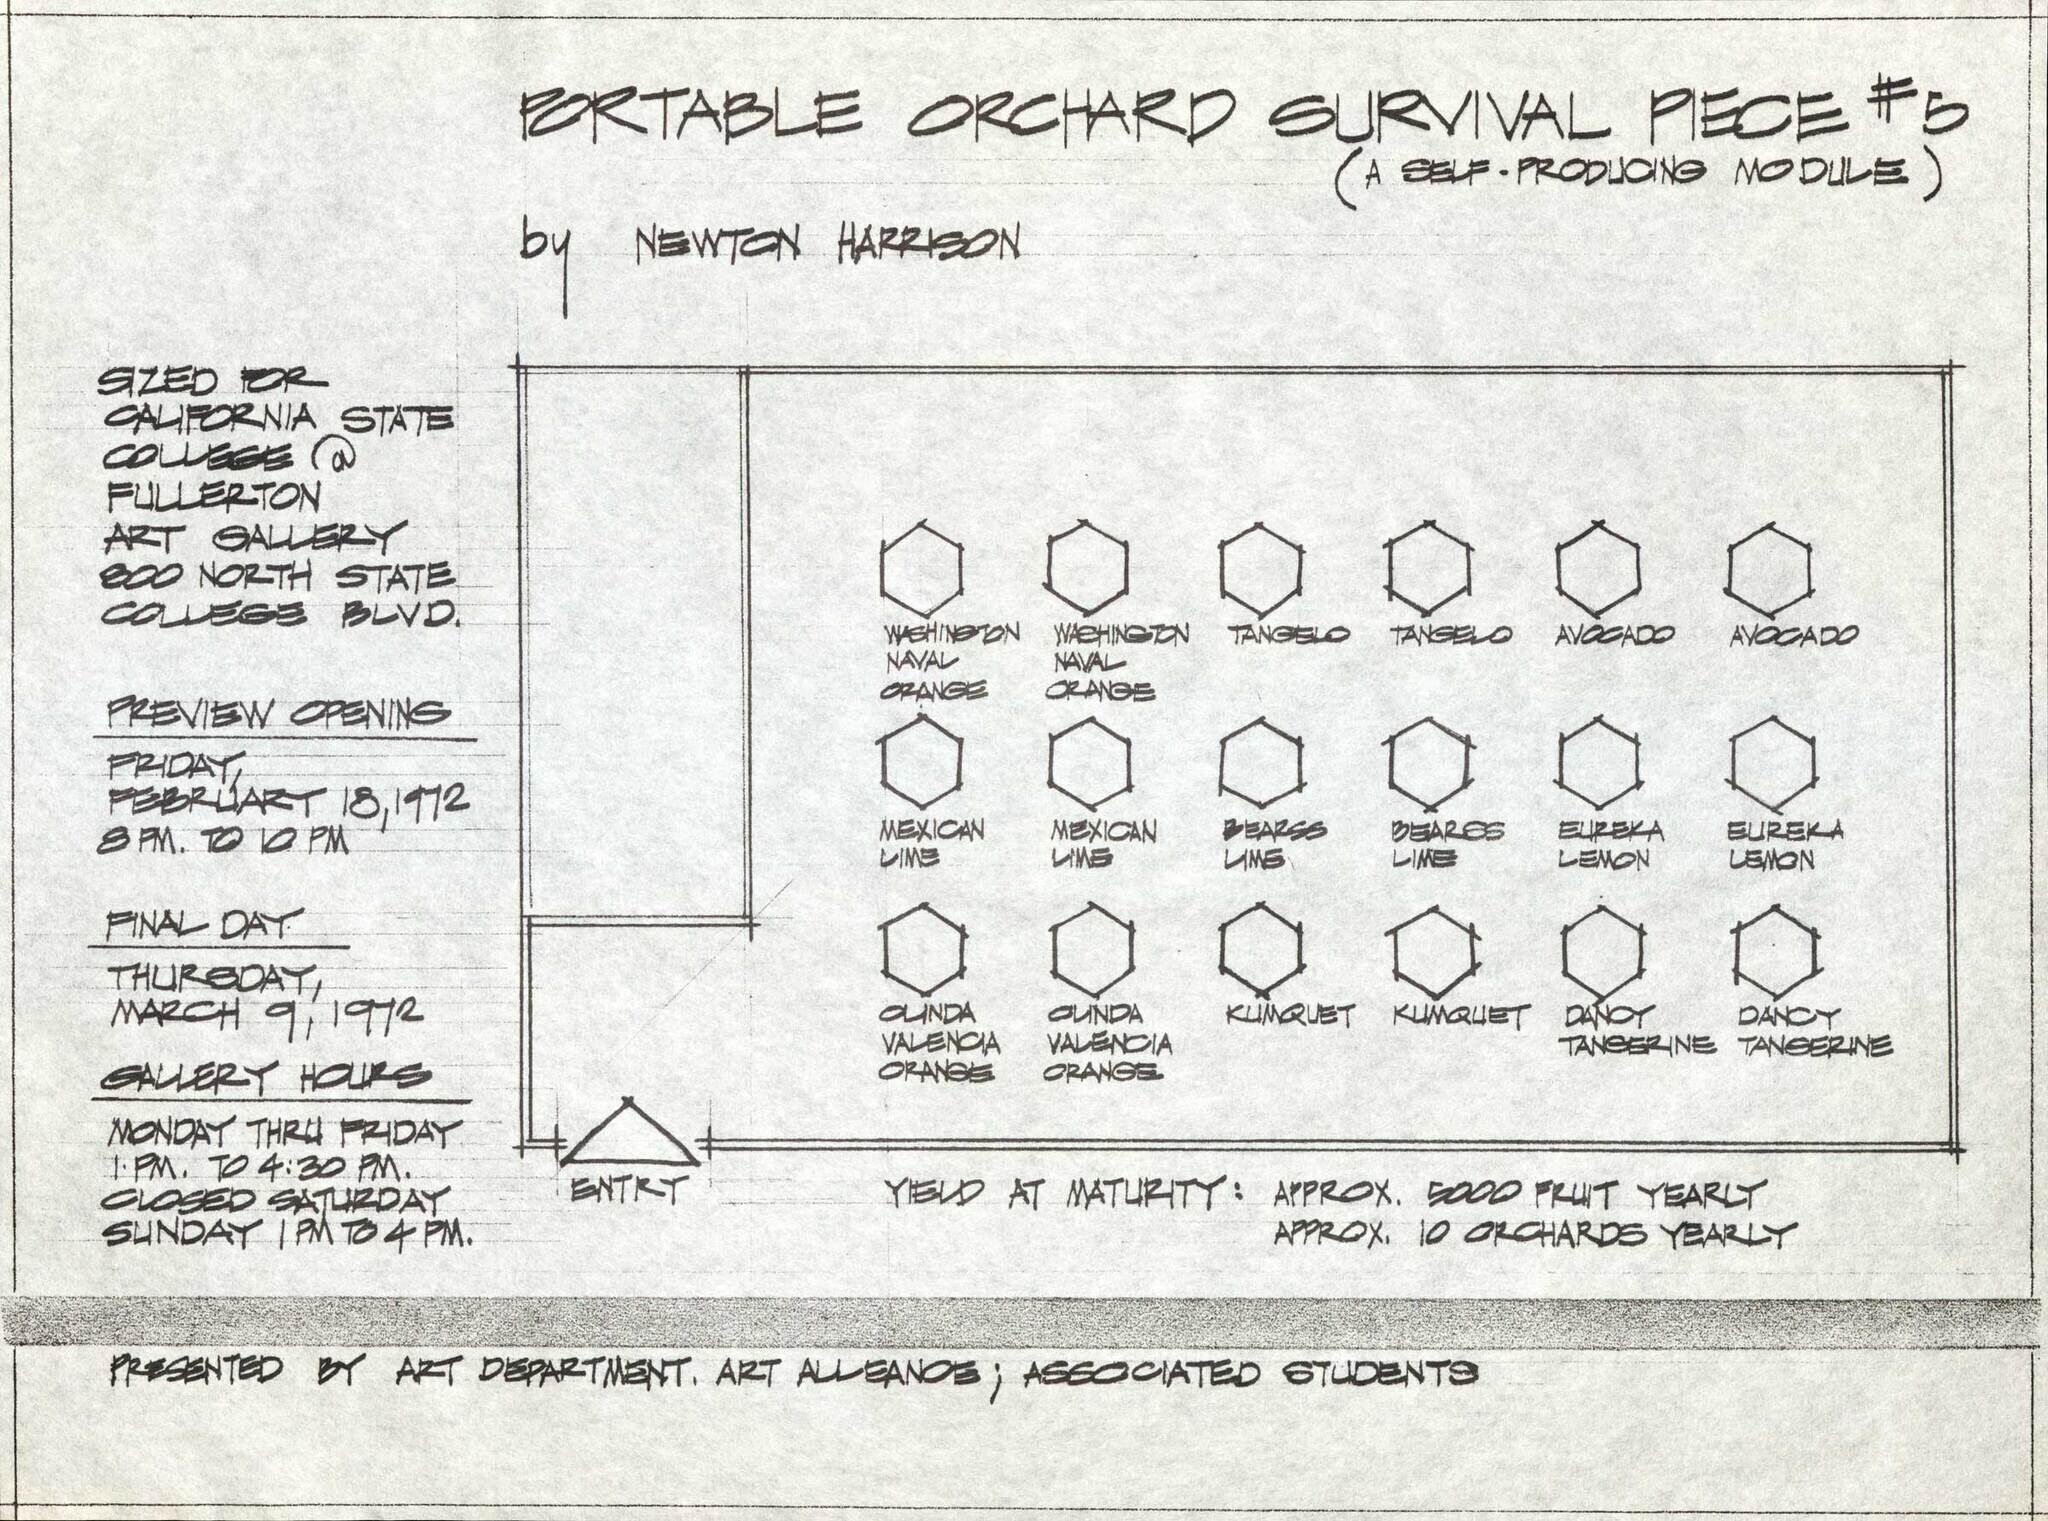 "Portable Orchard Survival Piece #5" by Newton Harrison. Diagram of fruit trees, event details for California State College, Fullerton, Feb 18 - Mar 9, 1972.